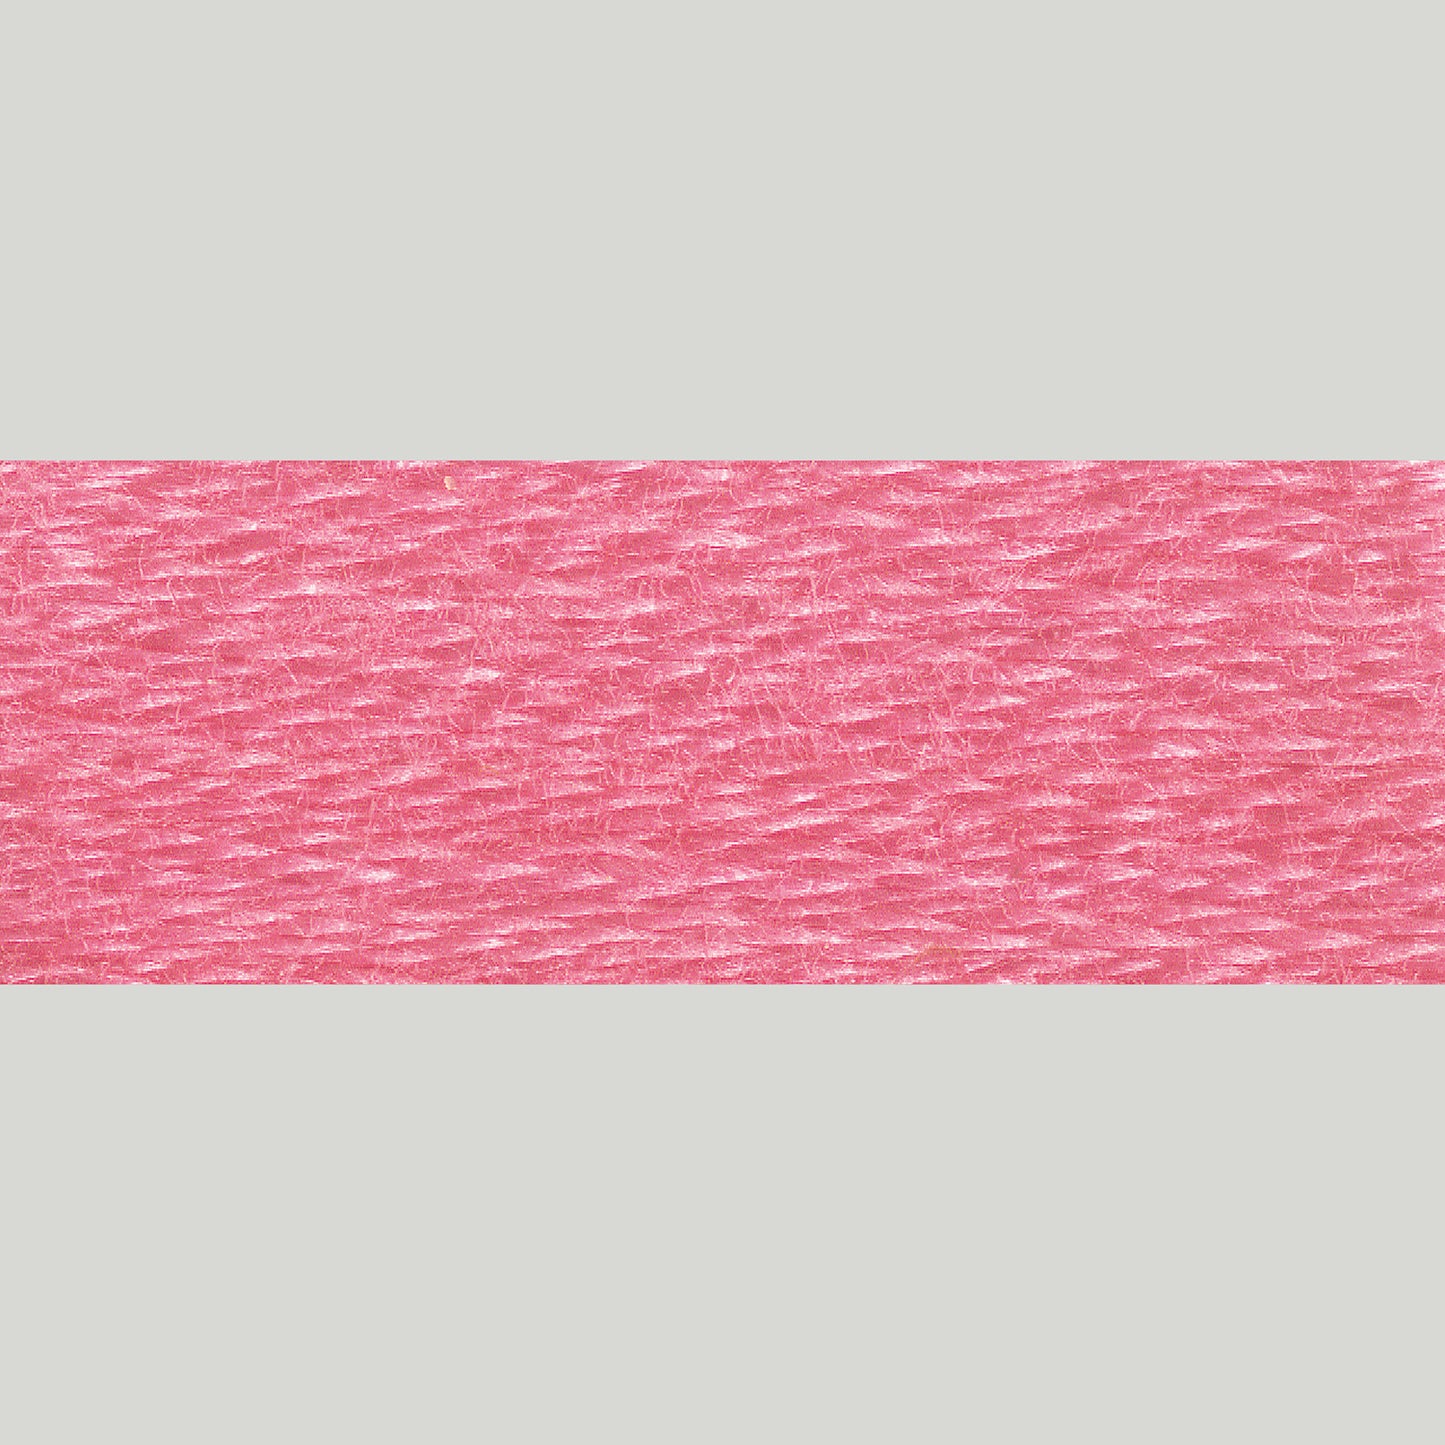 DMC Embroidery Floss - 3733 Dusty Rose Alternative View #1